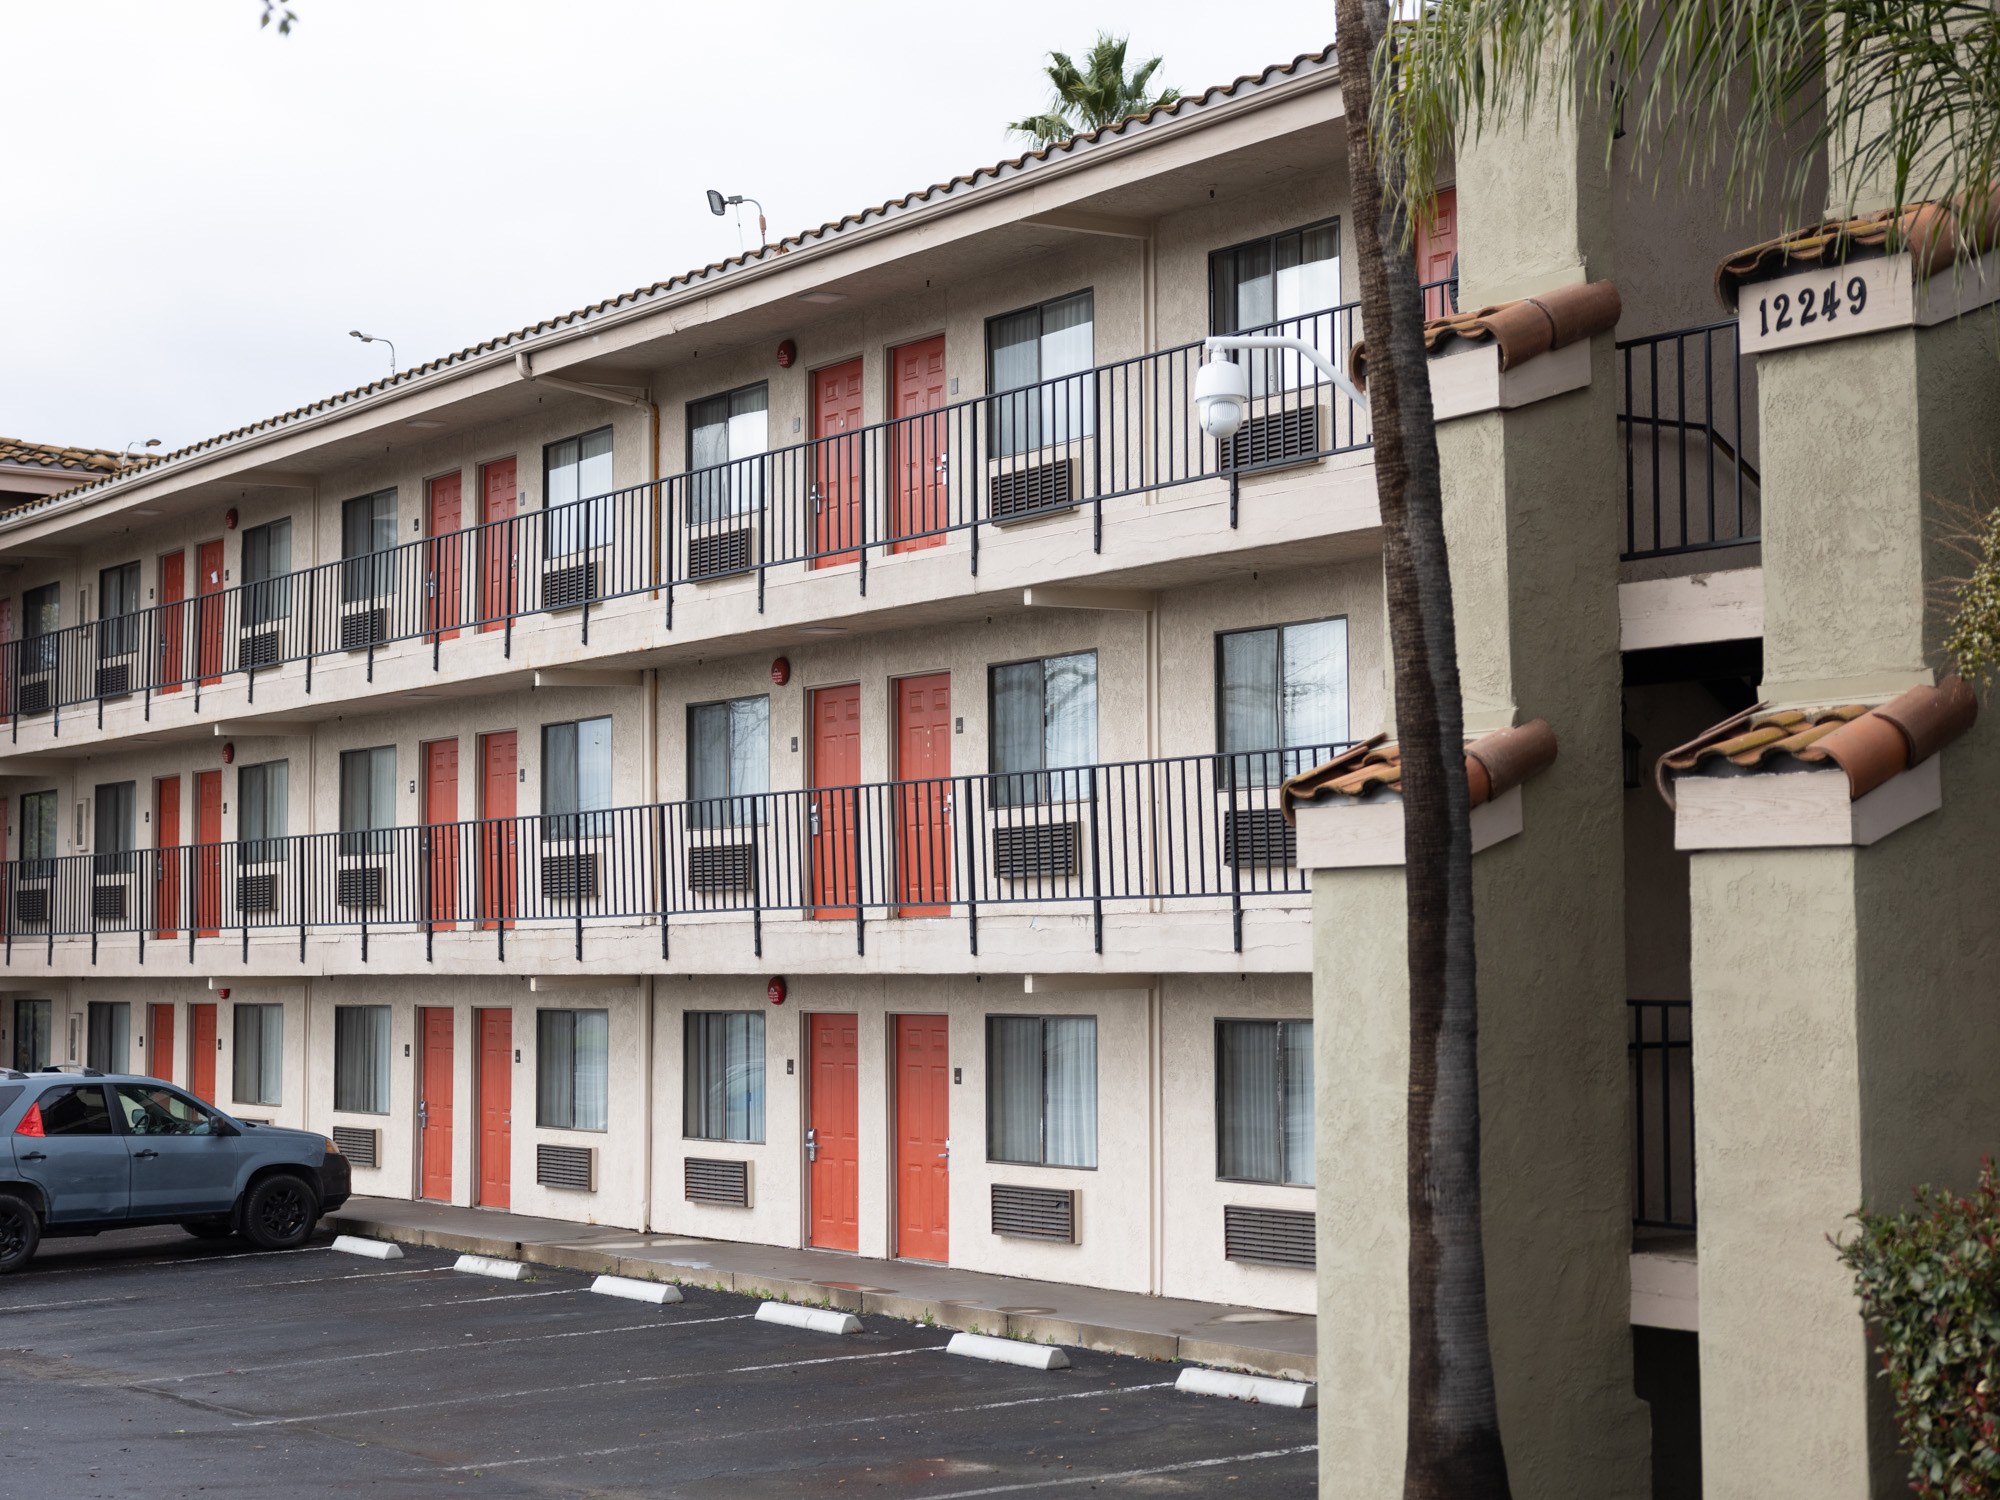 Project Roomkey motels extended for homeless residents 50 years in local news Major holidays this time of year photo